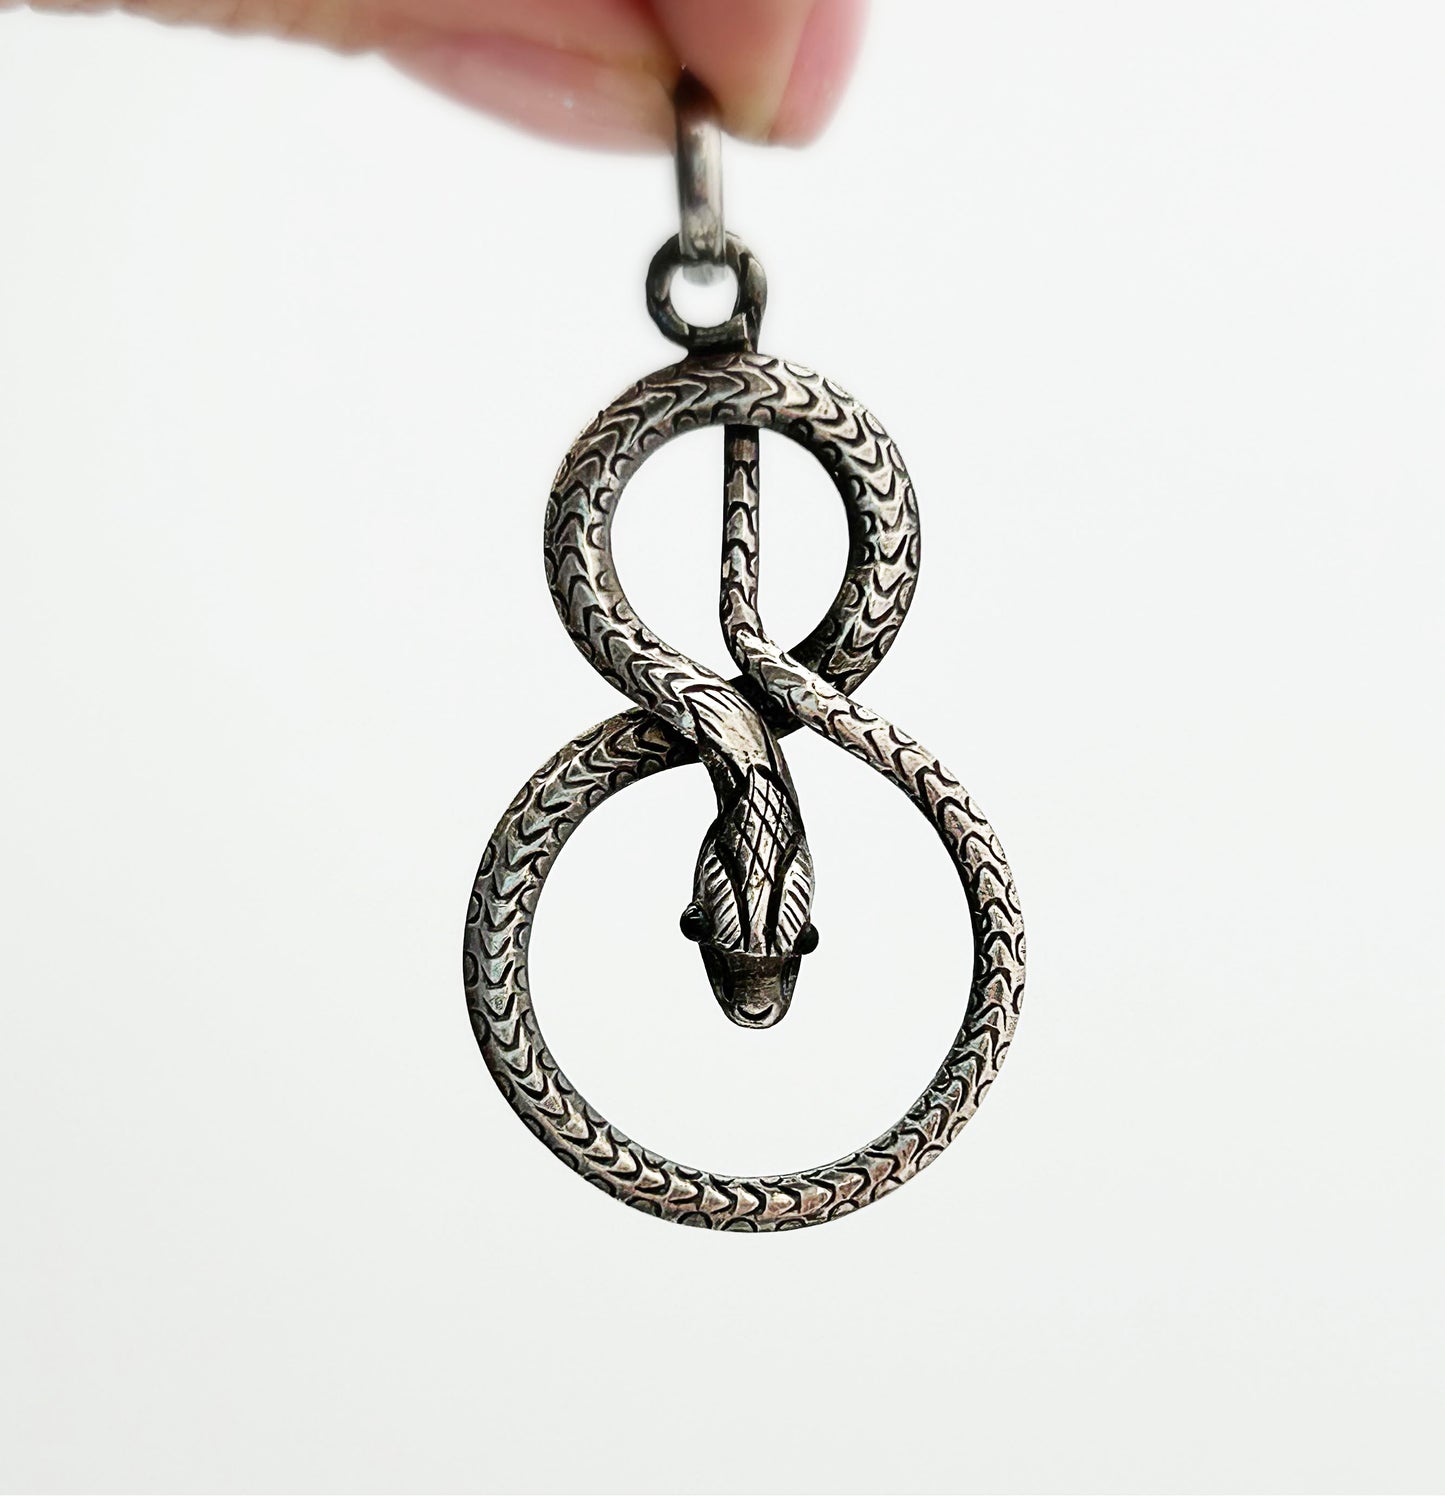 Vintage Serpent Snake with Onyx Eyes Sterling Silver Pendant